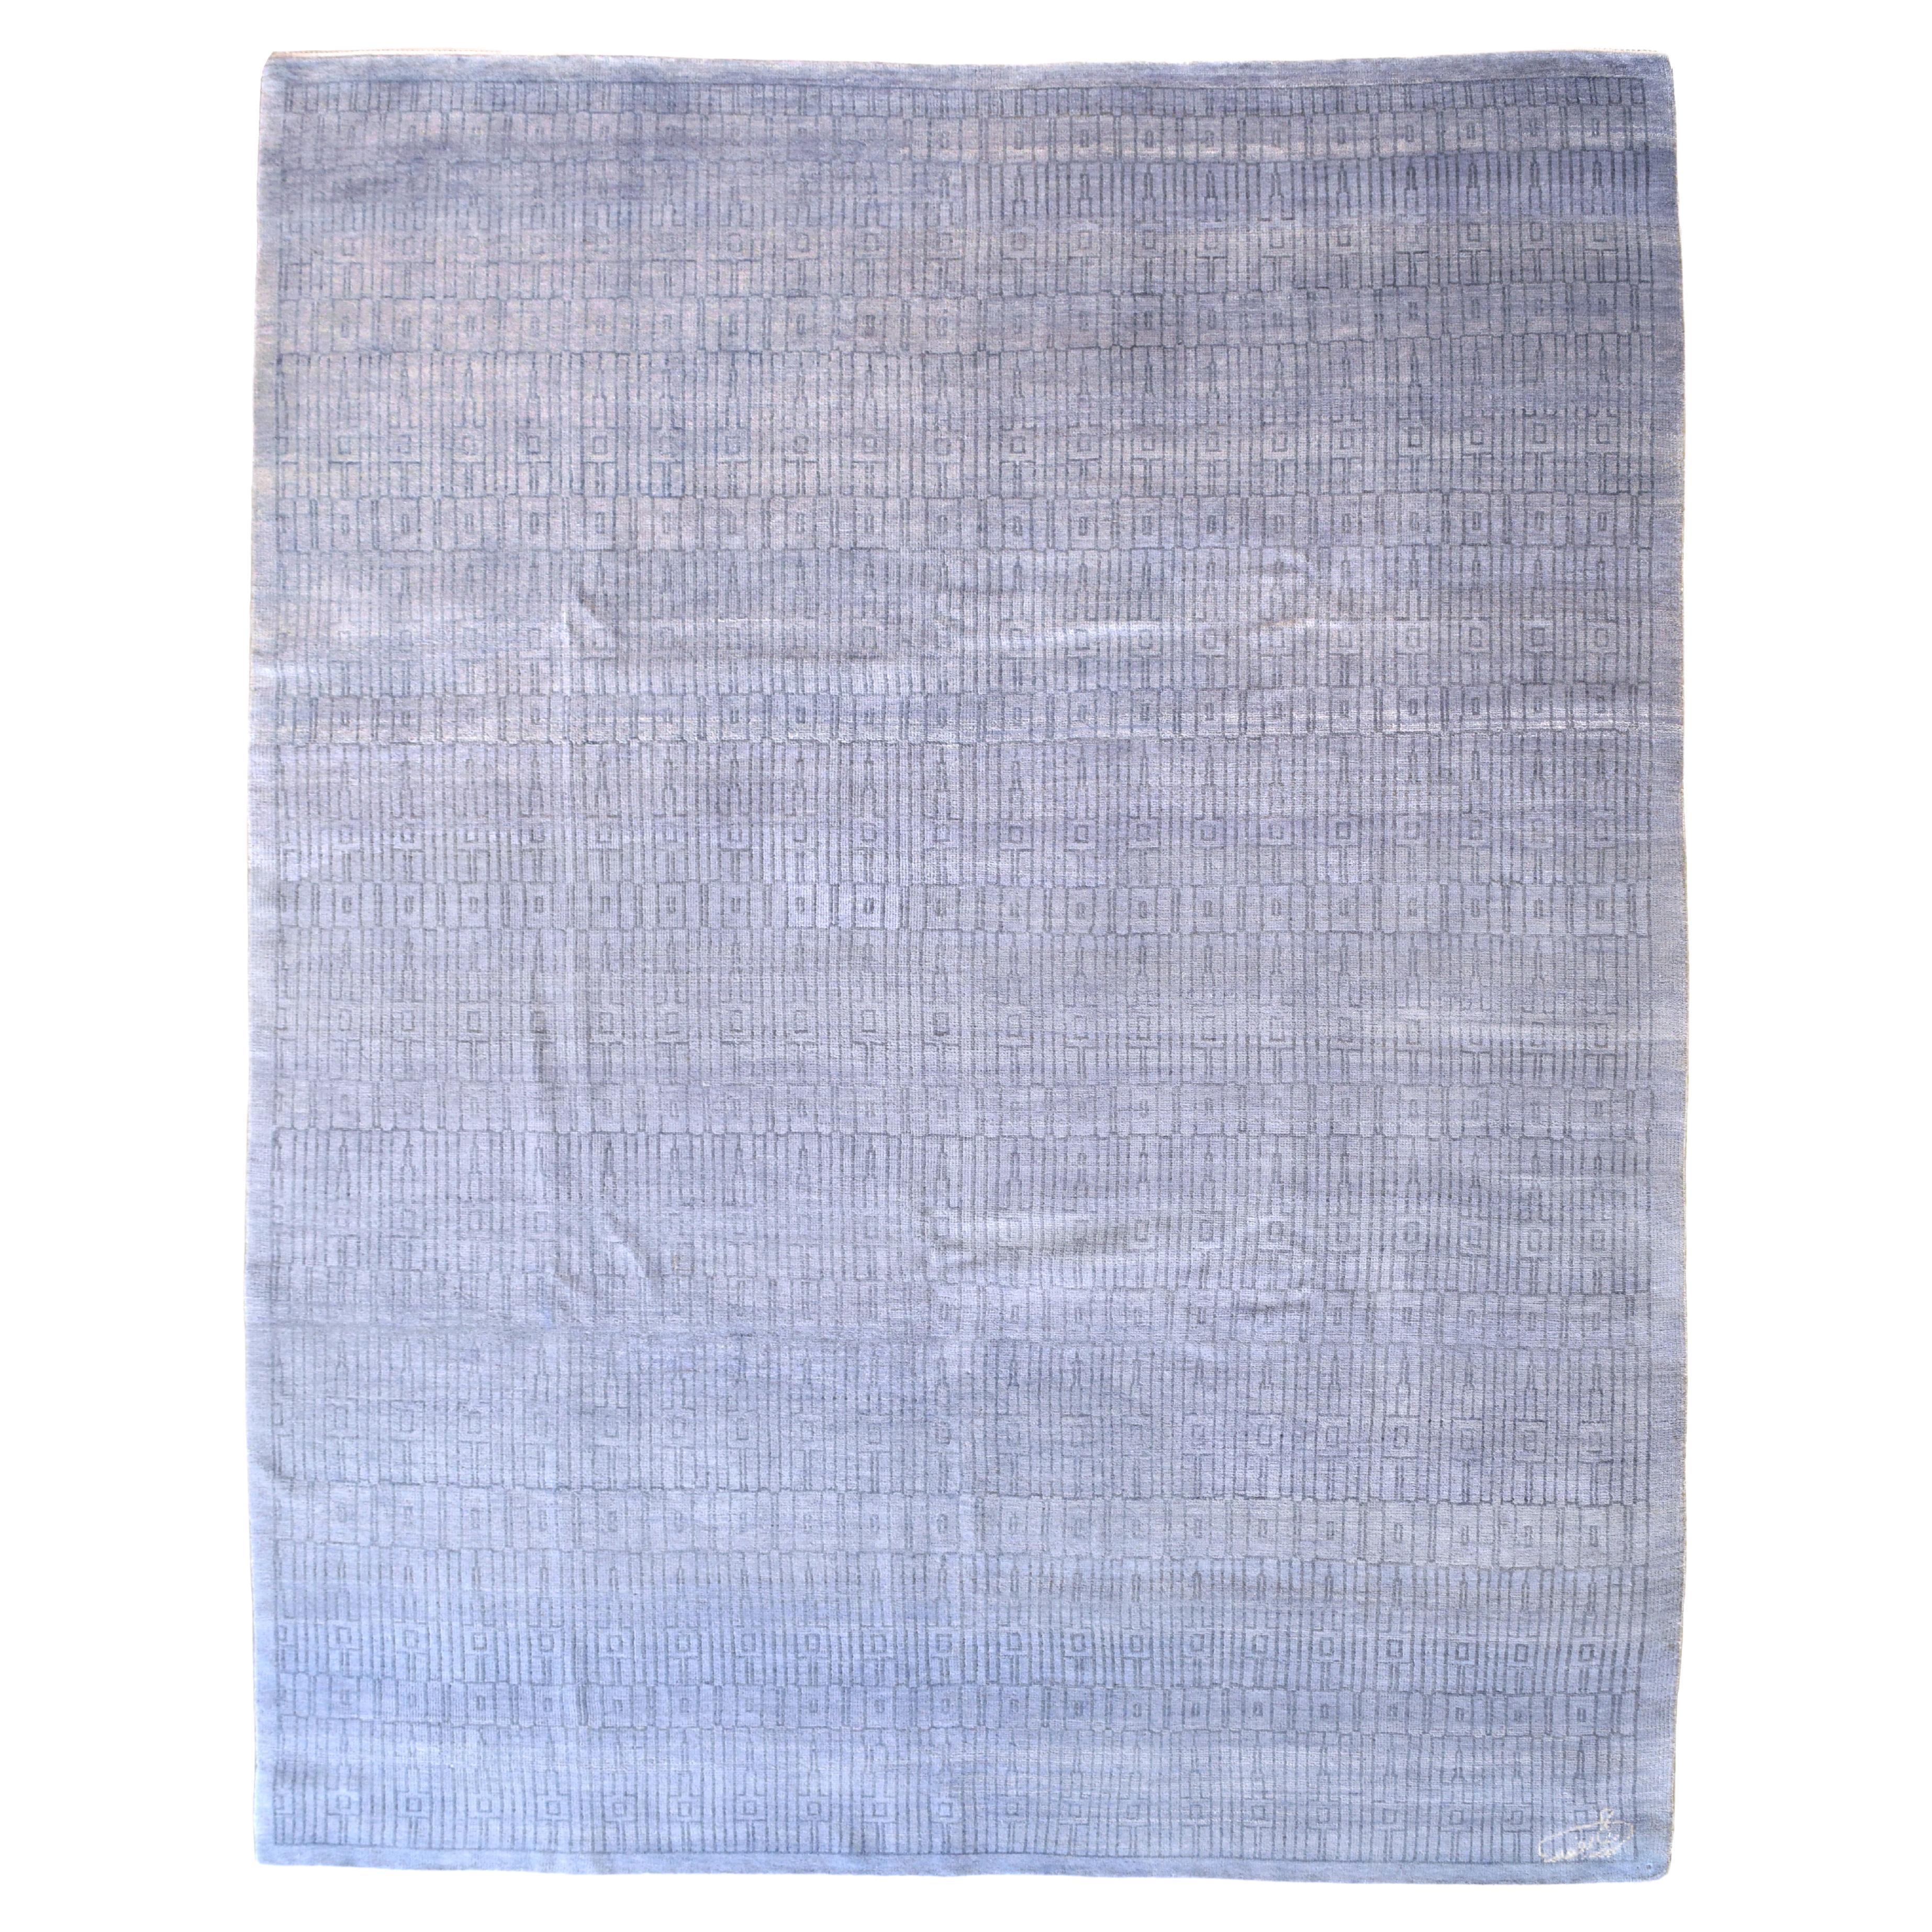 Blue and Gray Tone on Tone Geometric "Excelsior" Area Rug in Pure Wool, 8x10 For Sale